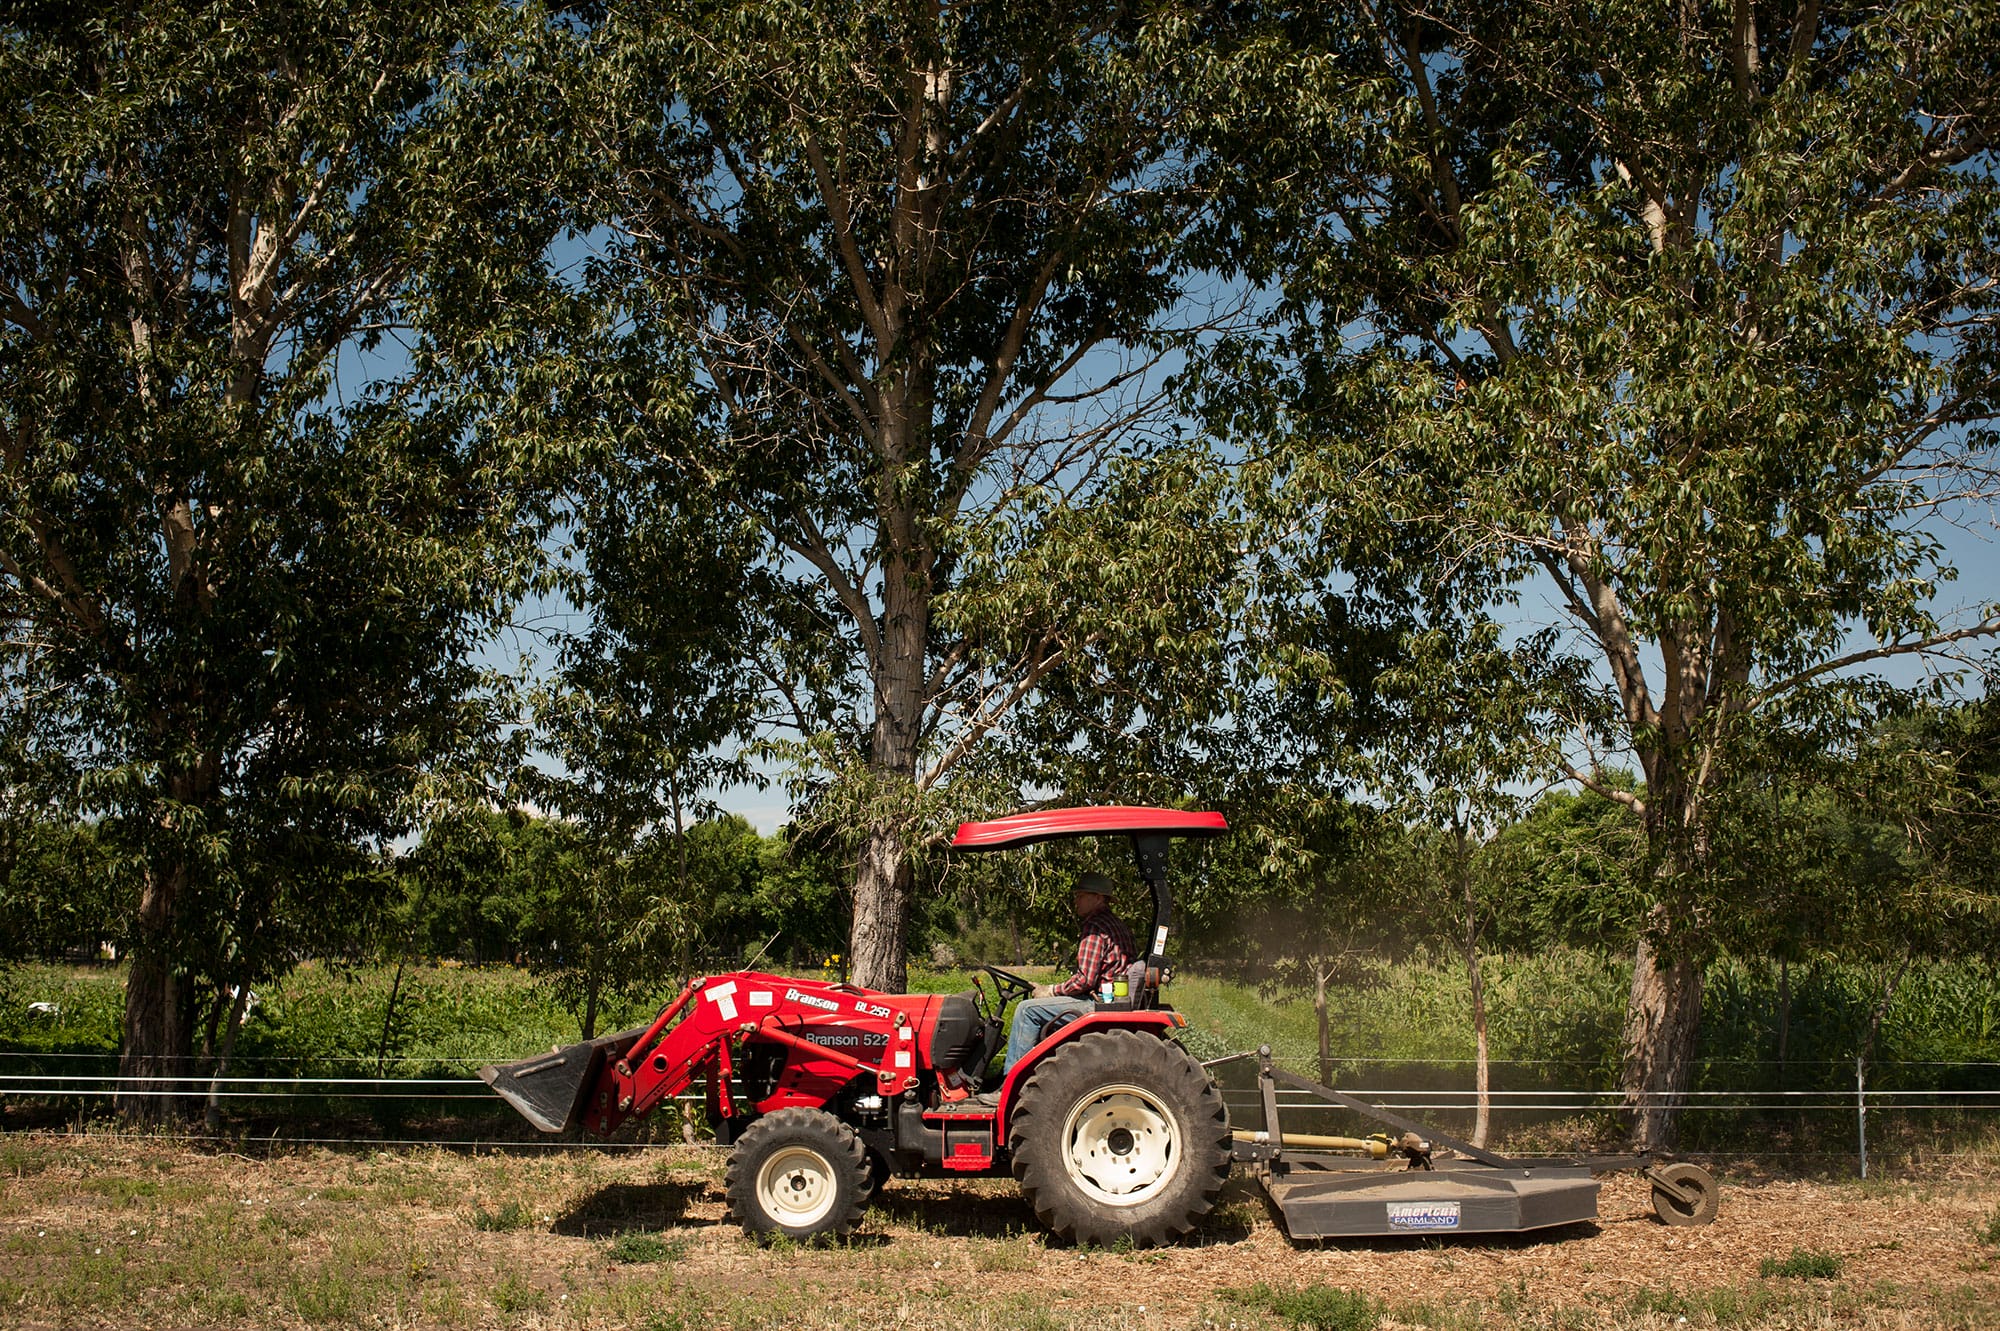 A red tractor parked in a field.